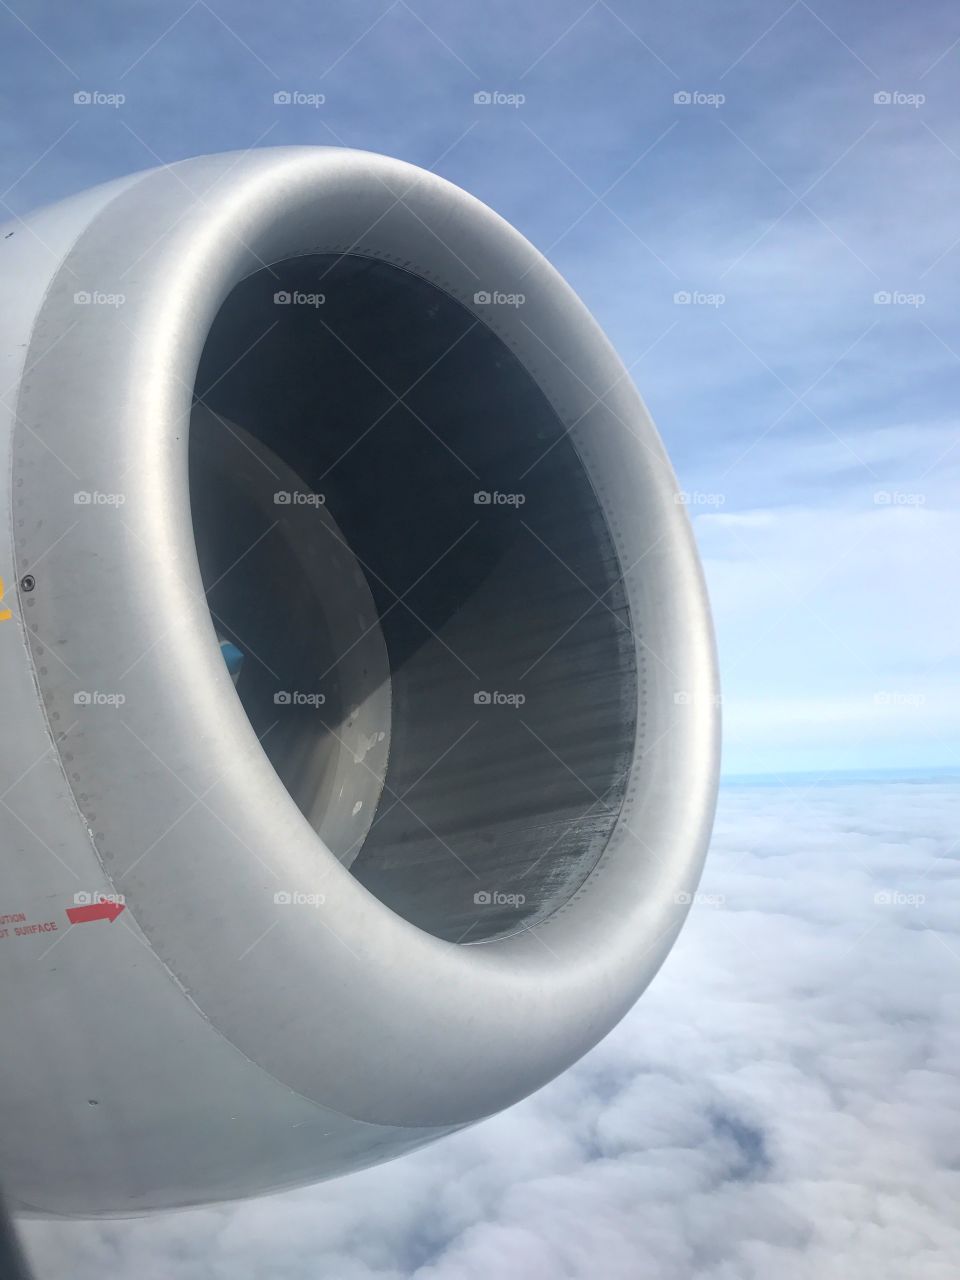 Intake of a jet engine in the sky 